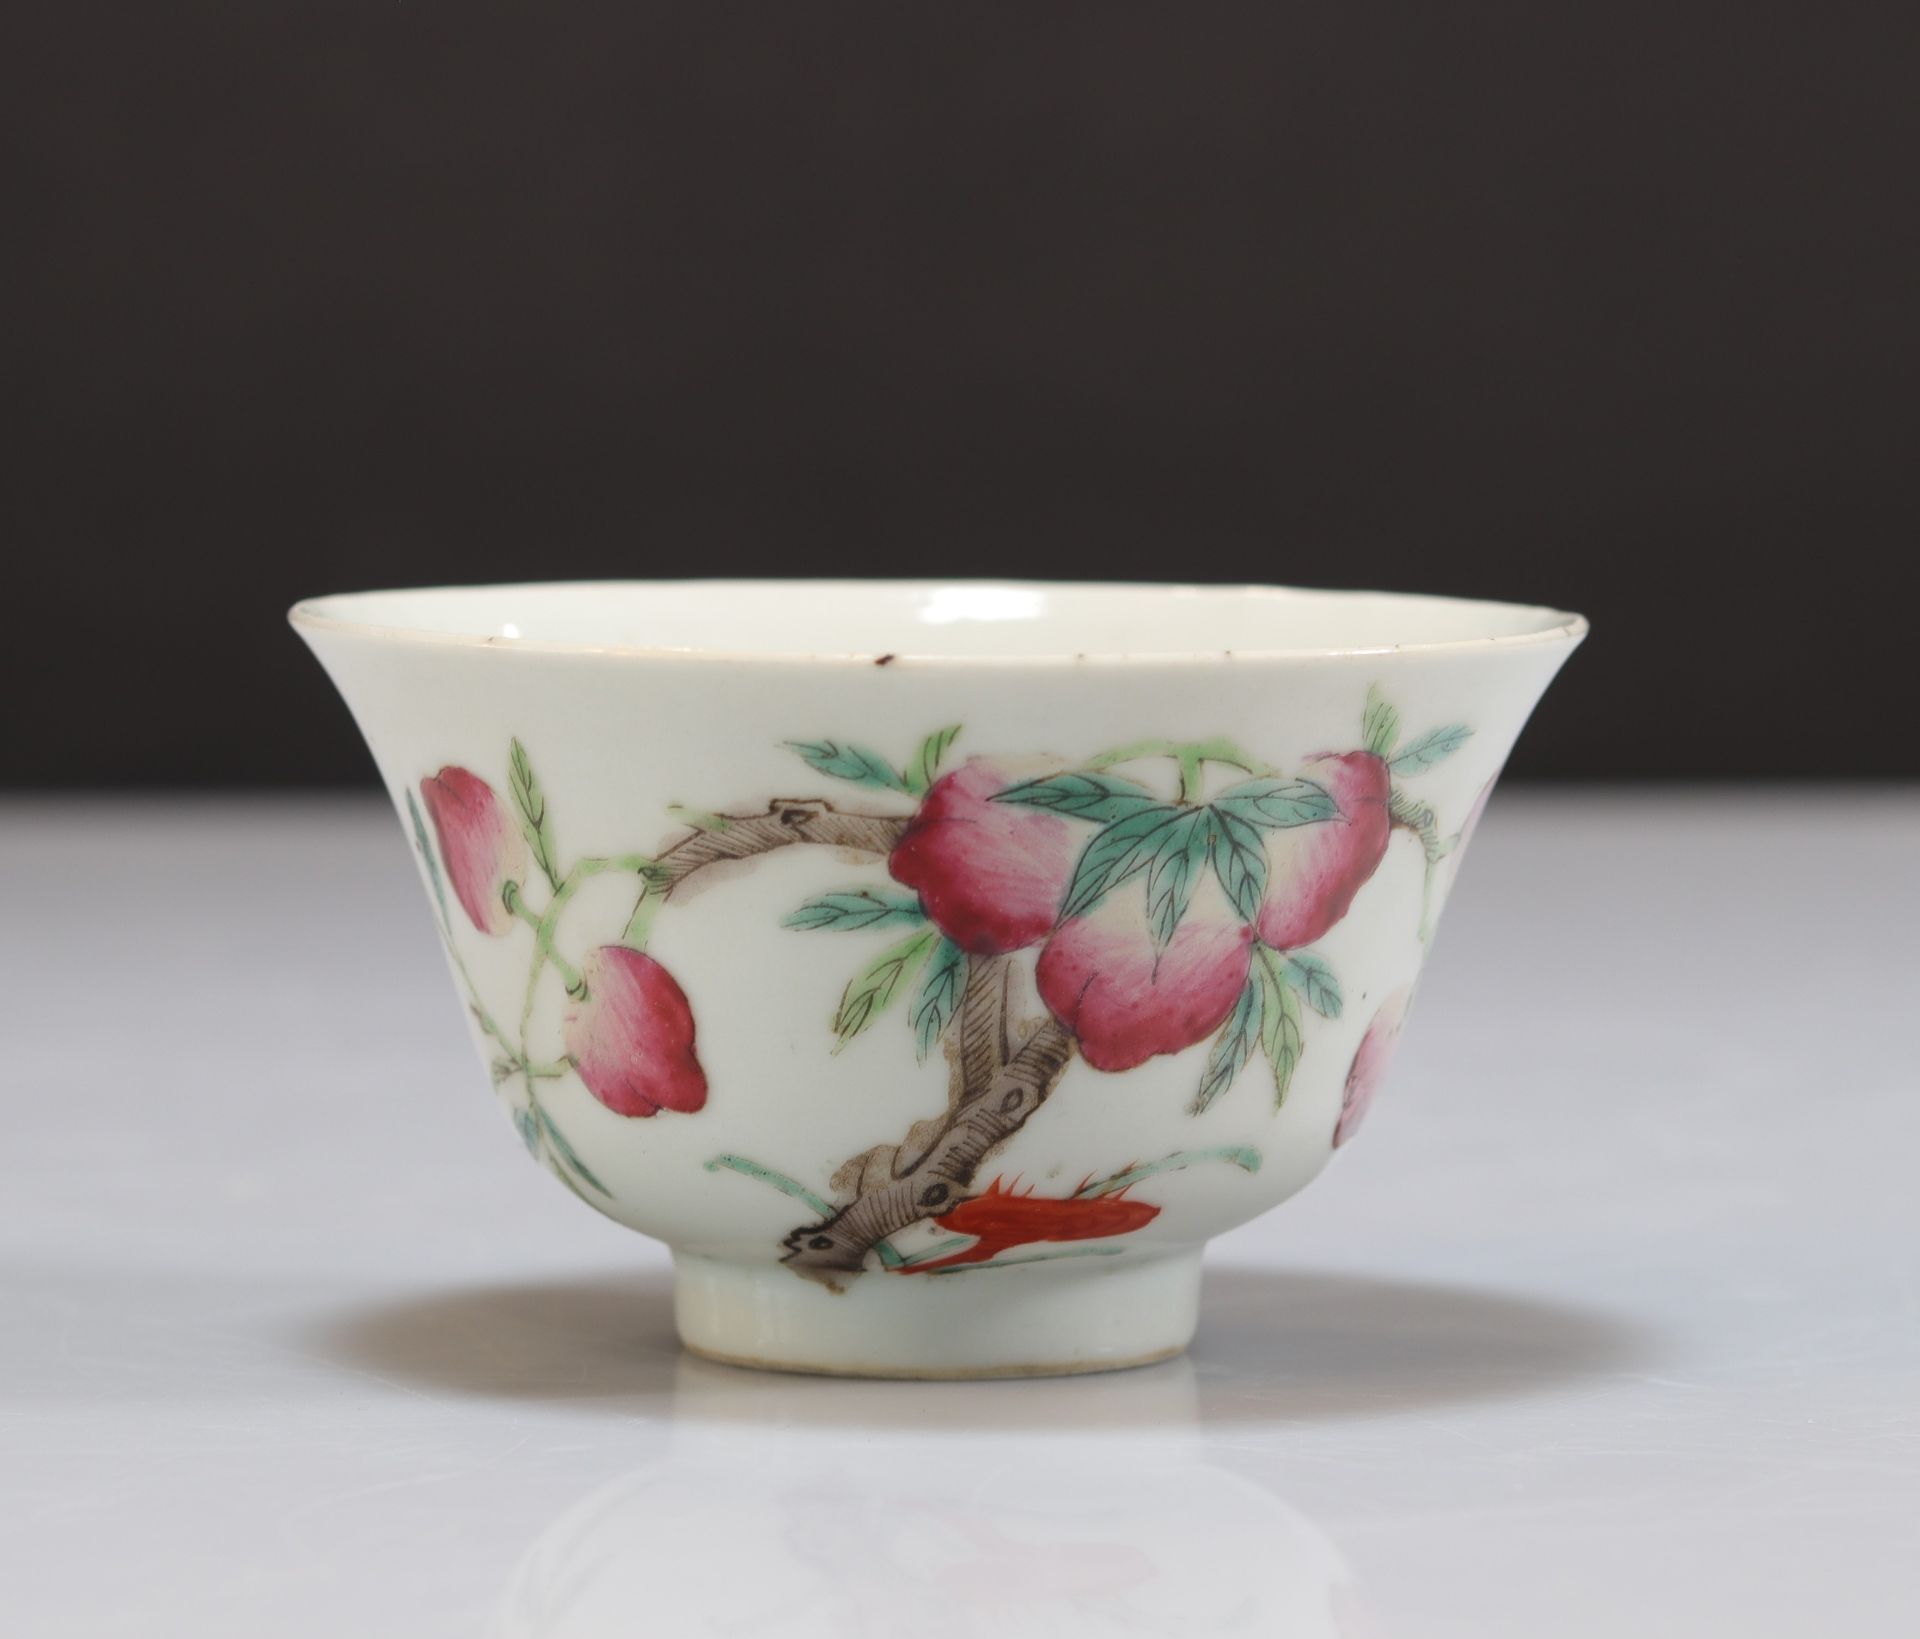 Porcelain bowl of the "famille rose" decorated with peaches